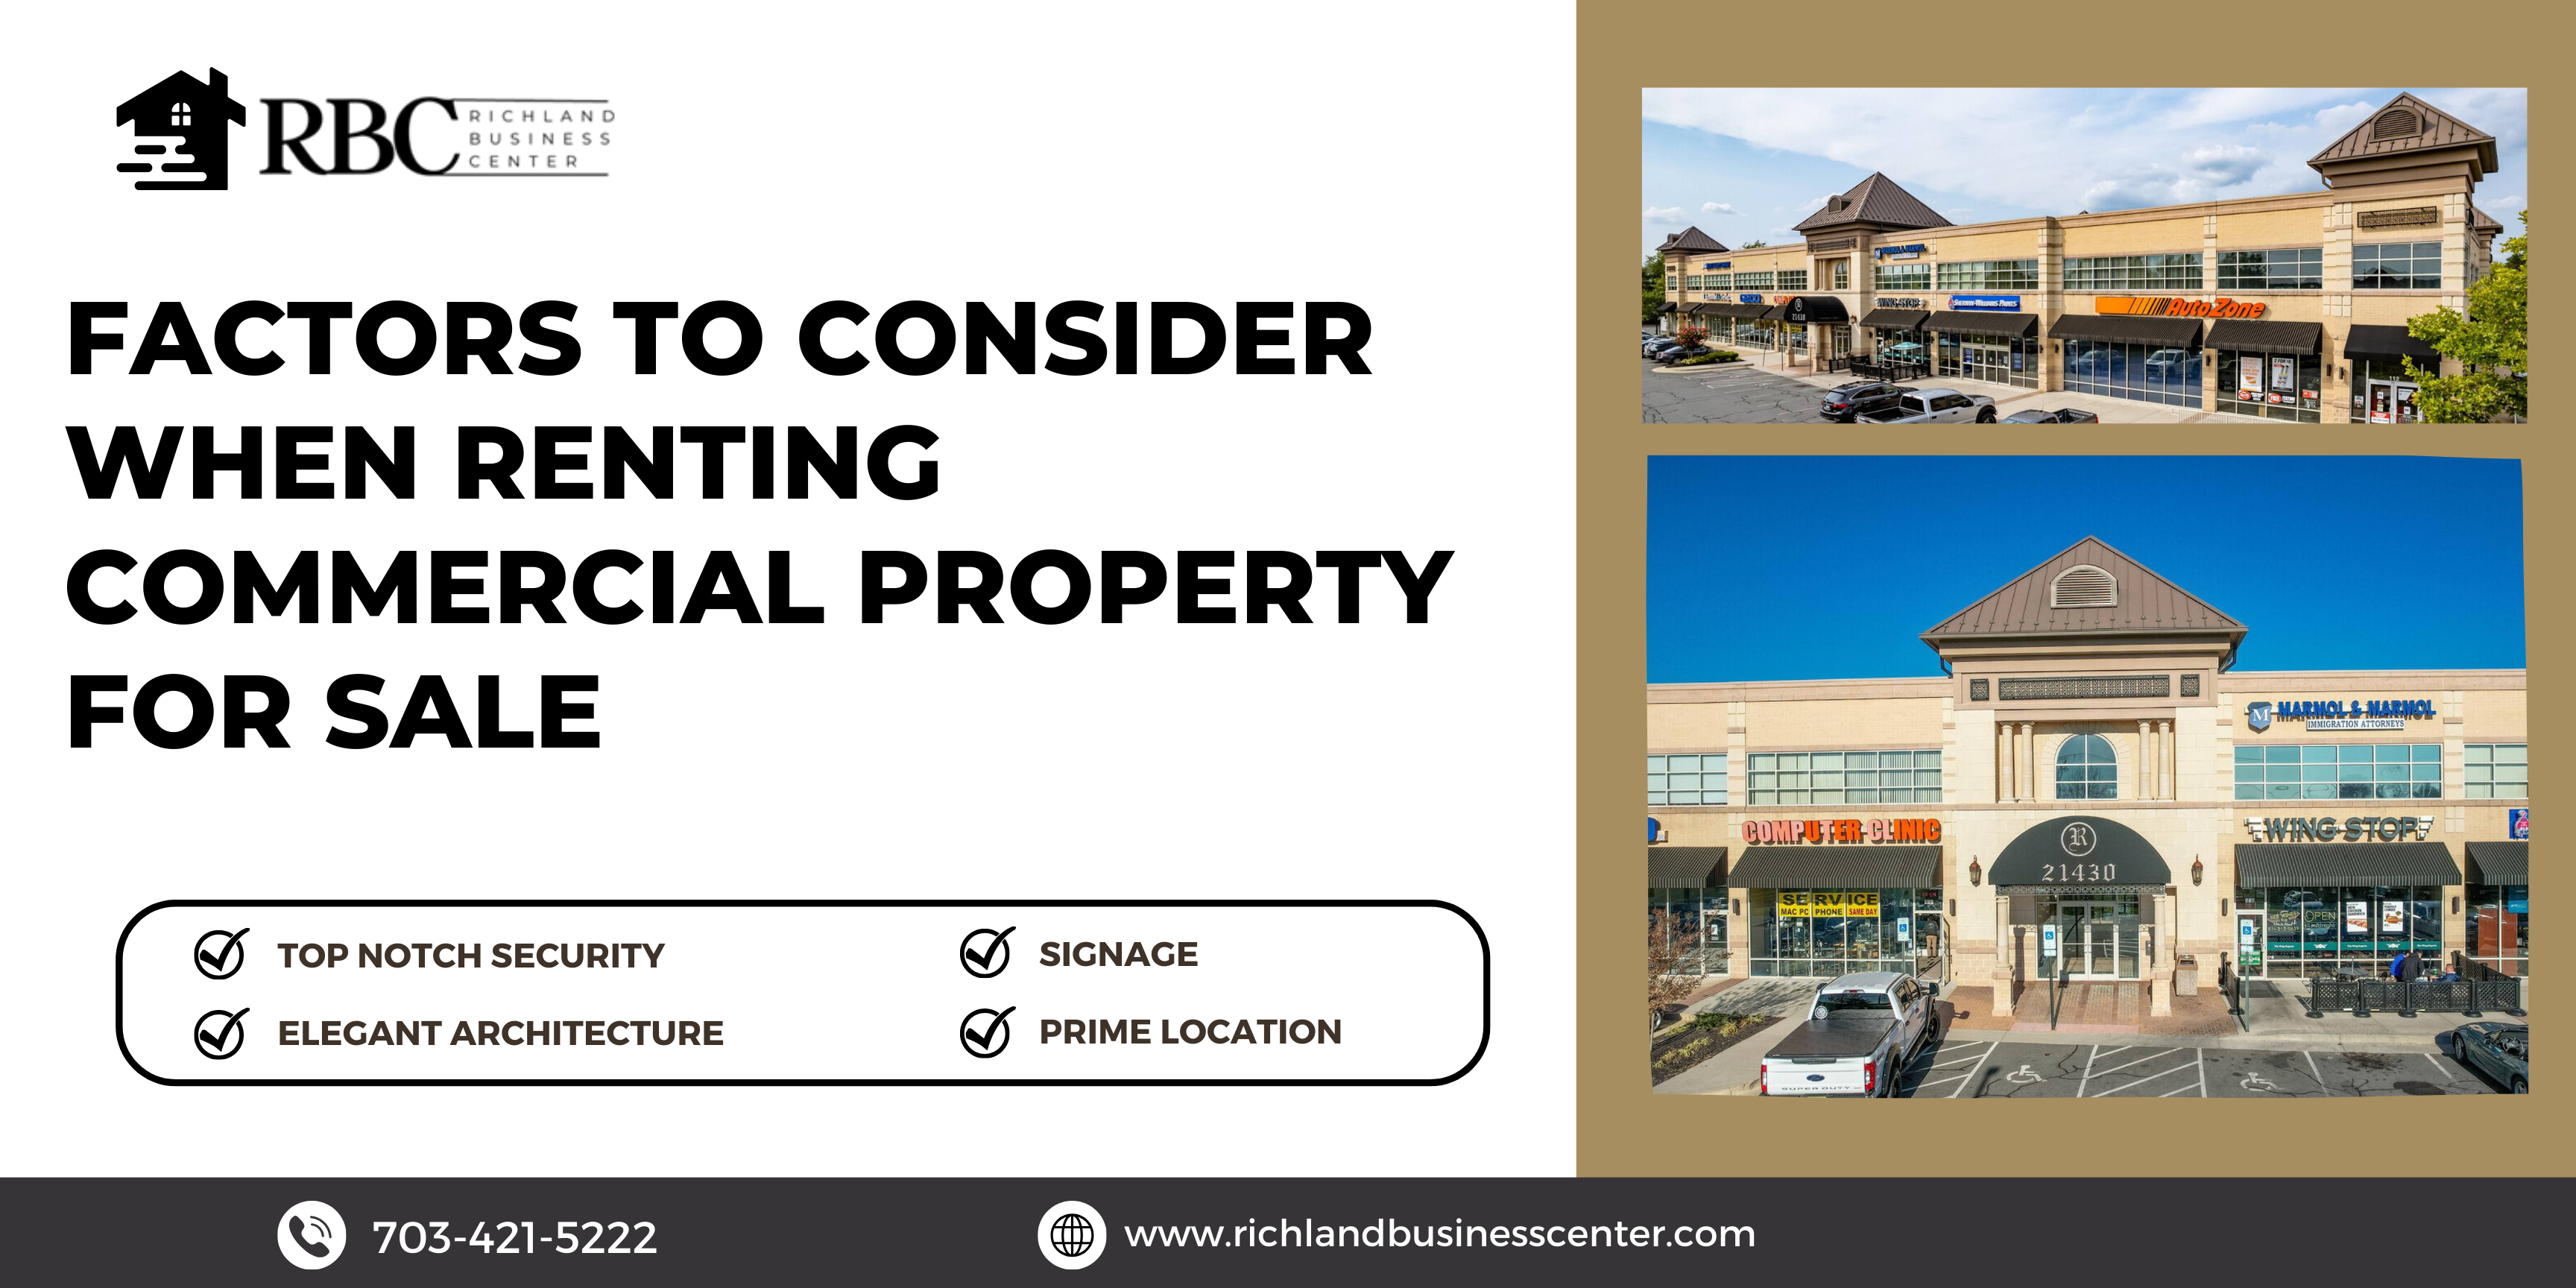 Factors to Consider When Renting Commercial Property